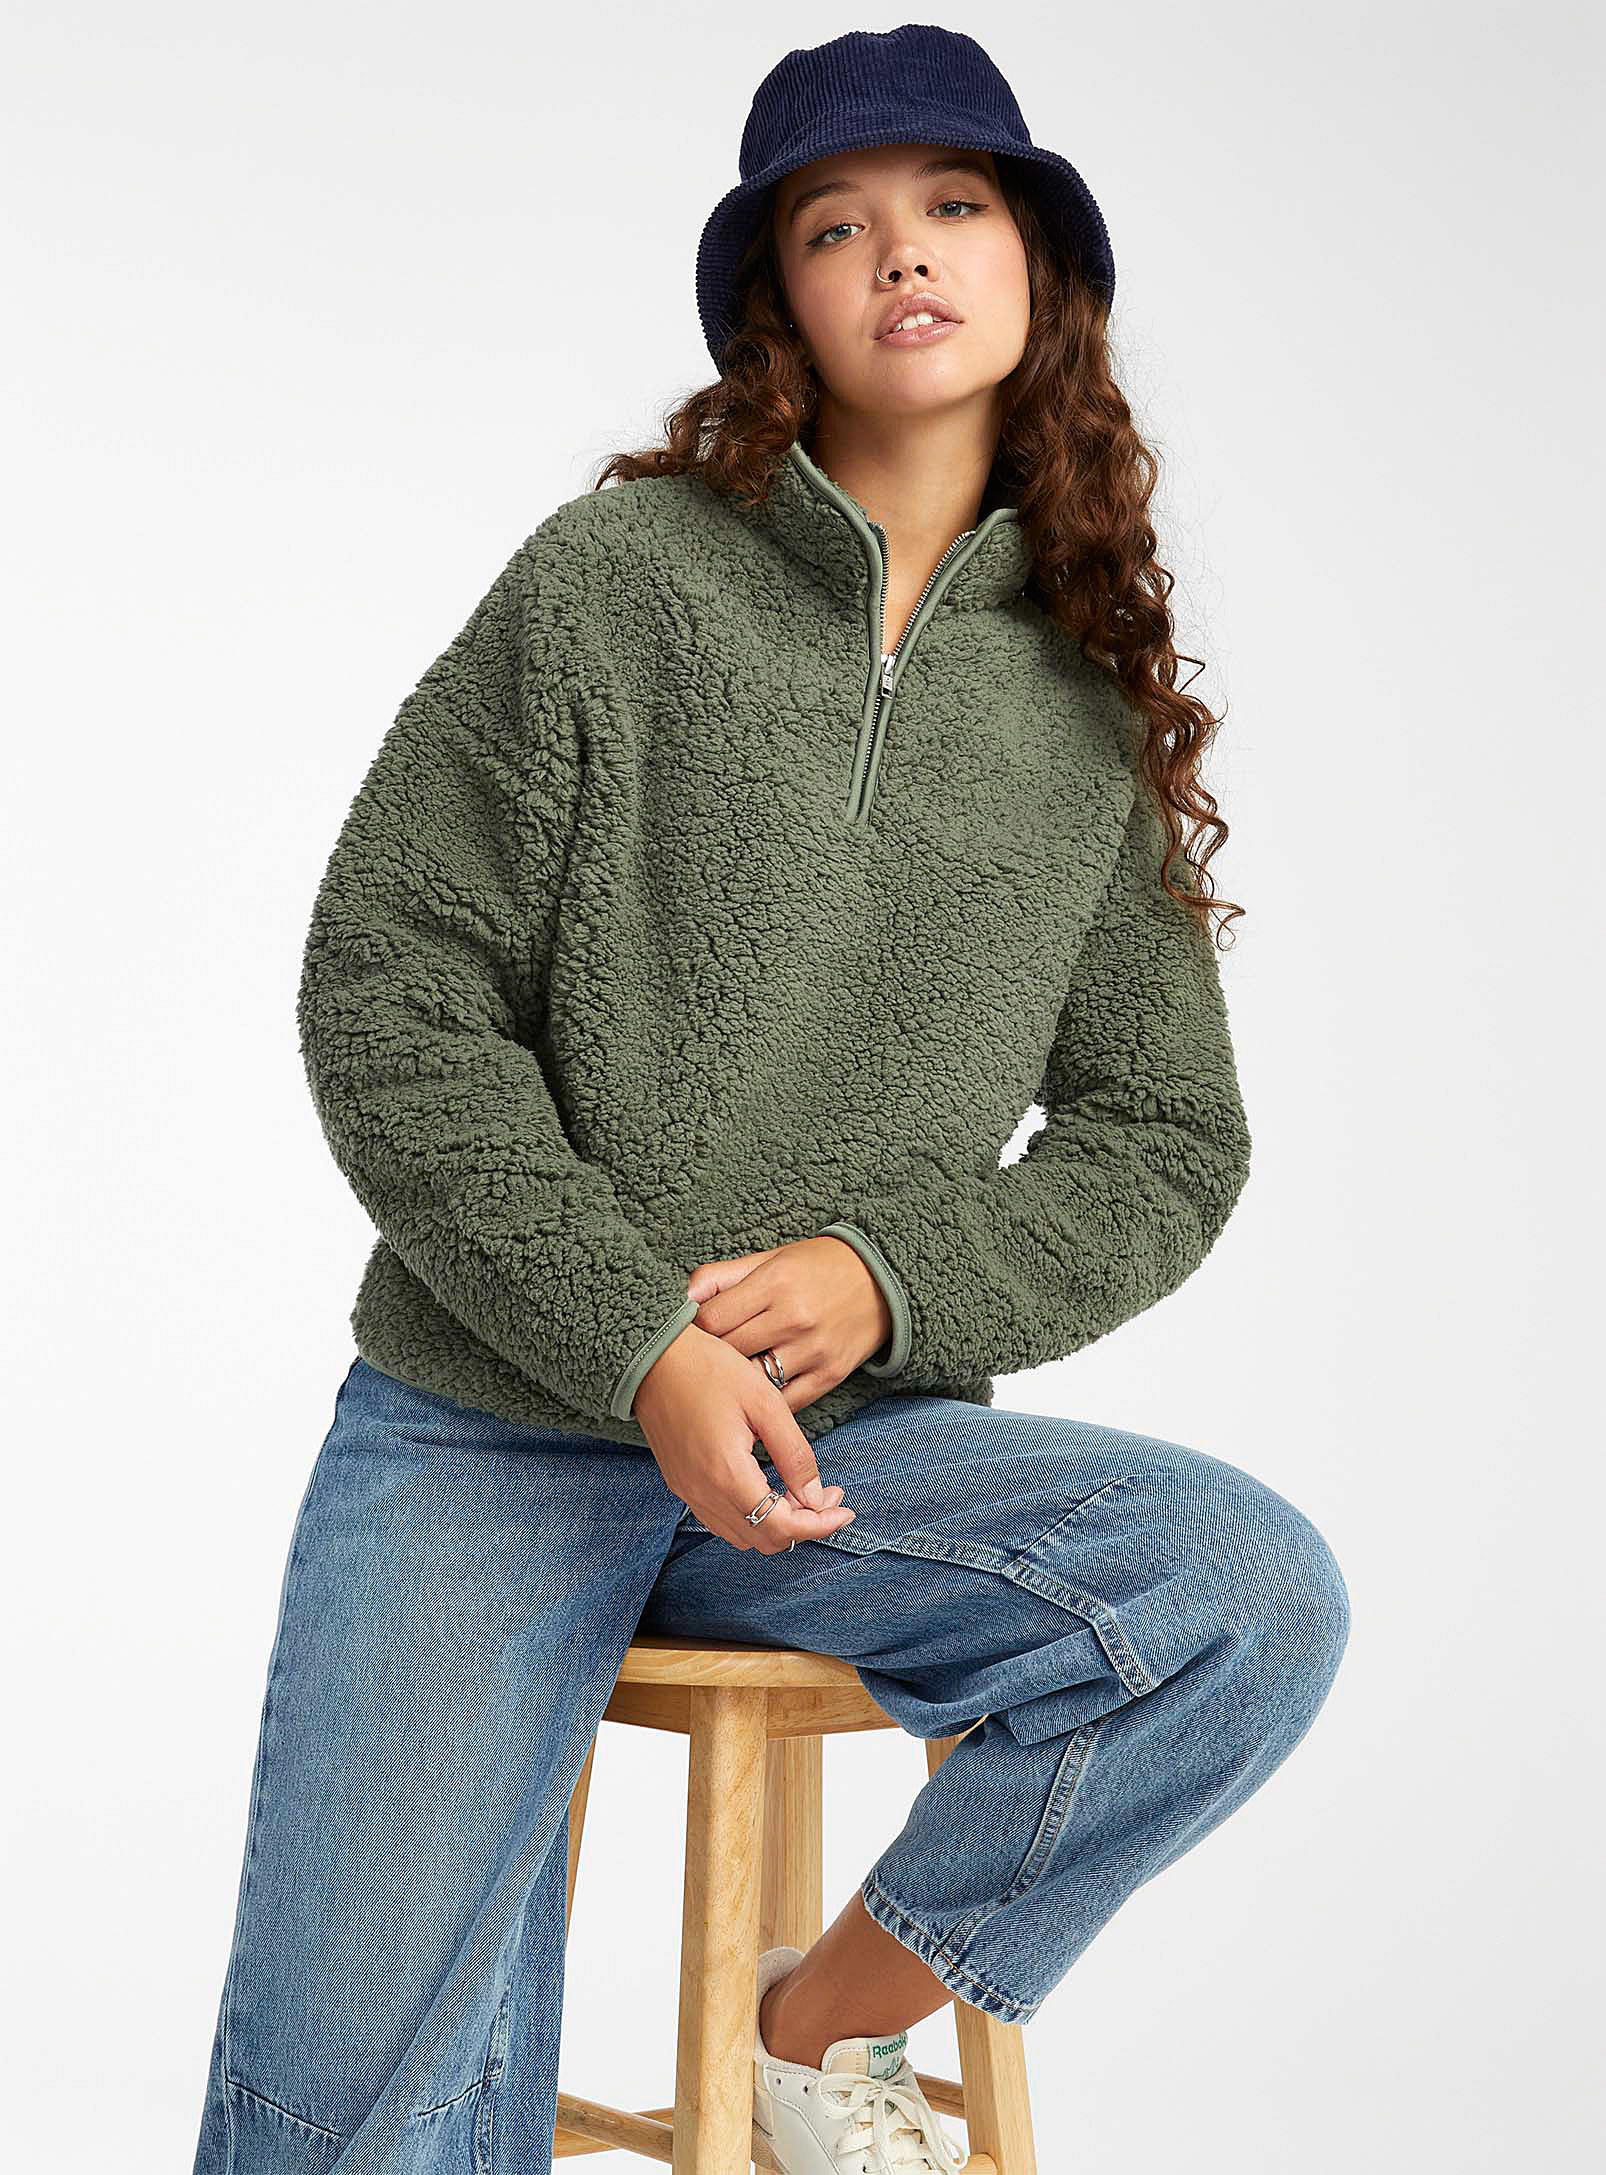 A person wearing a fuzzy sweatshirt with jeans